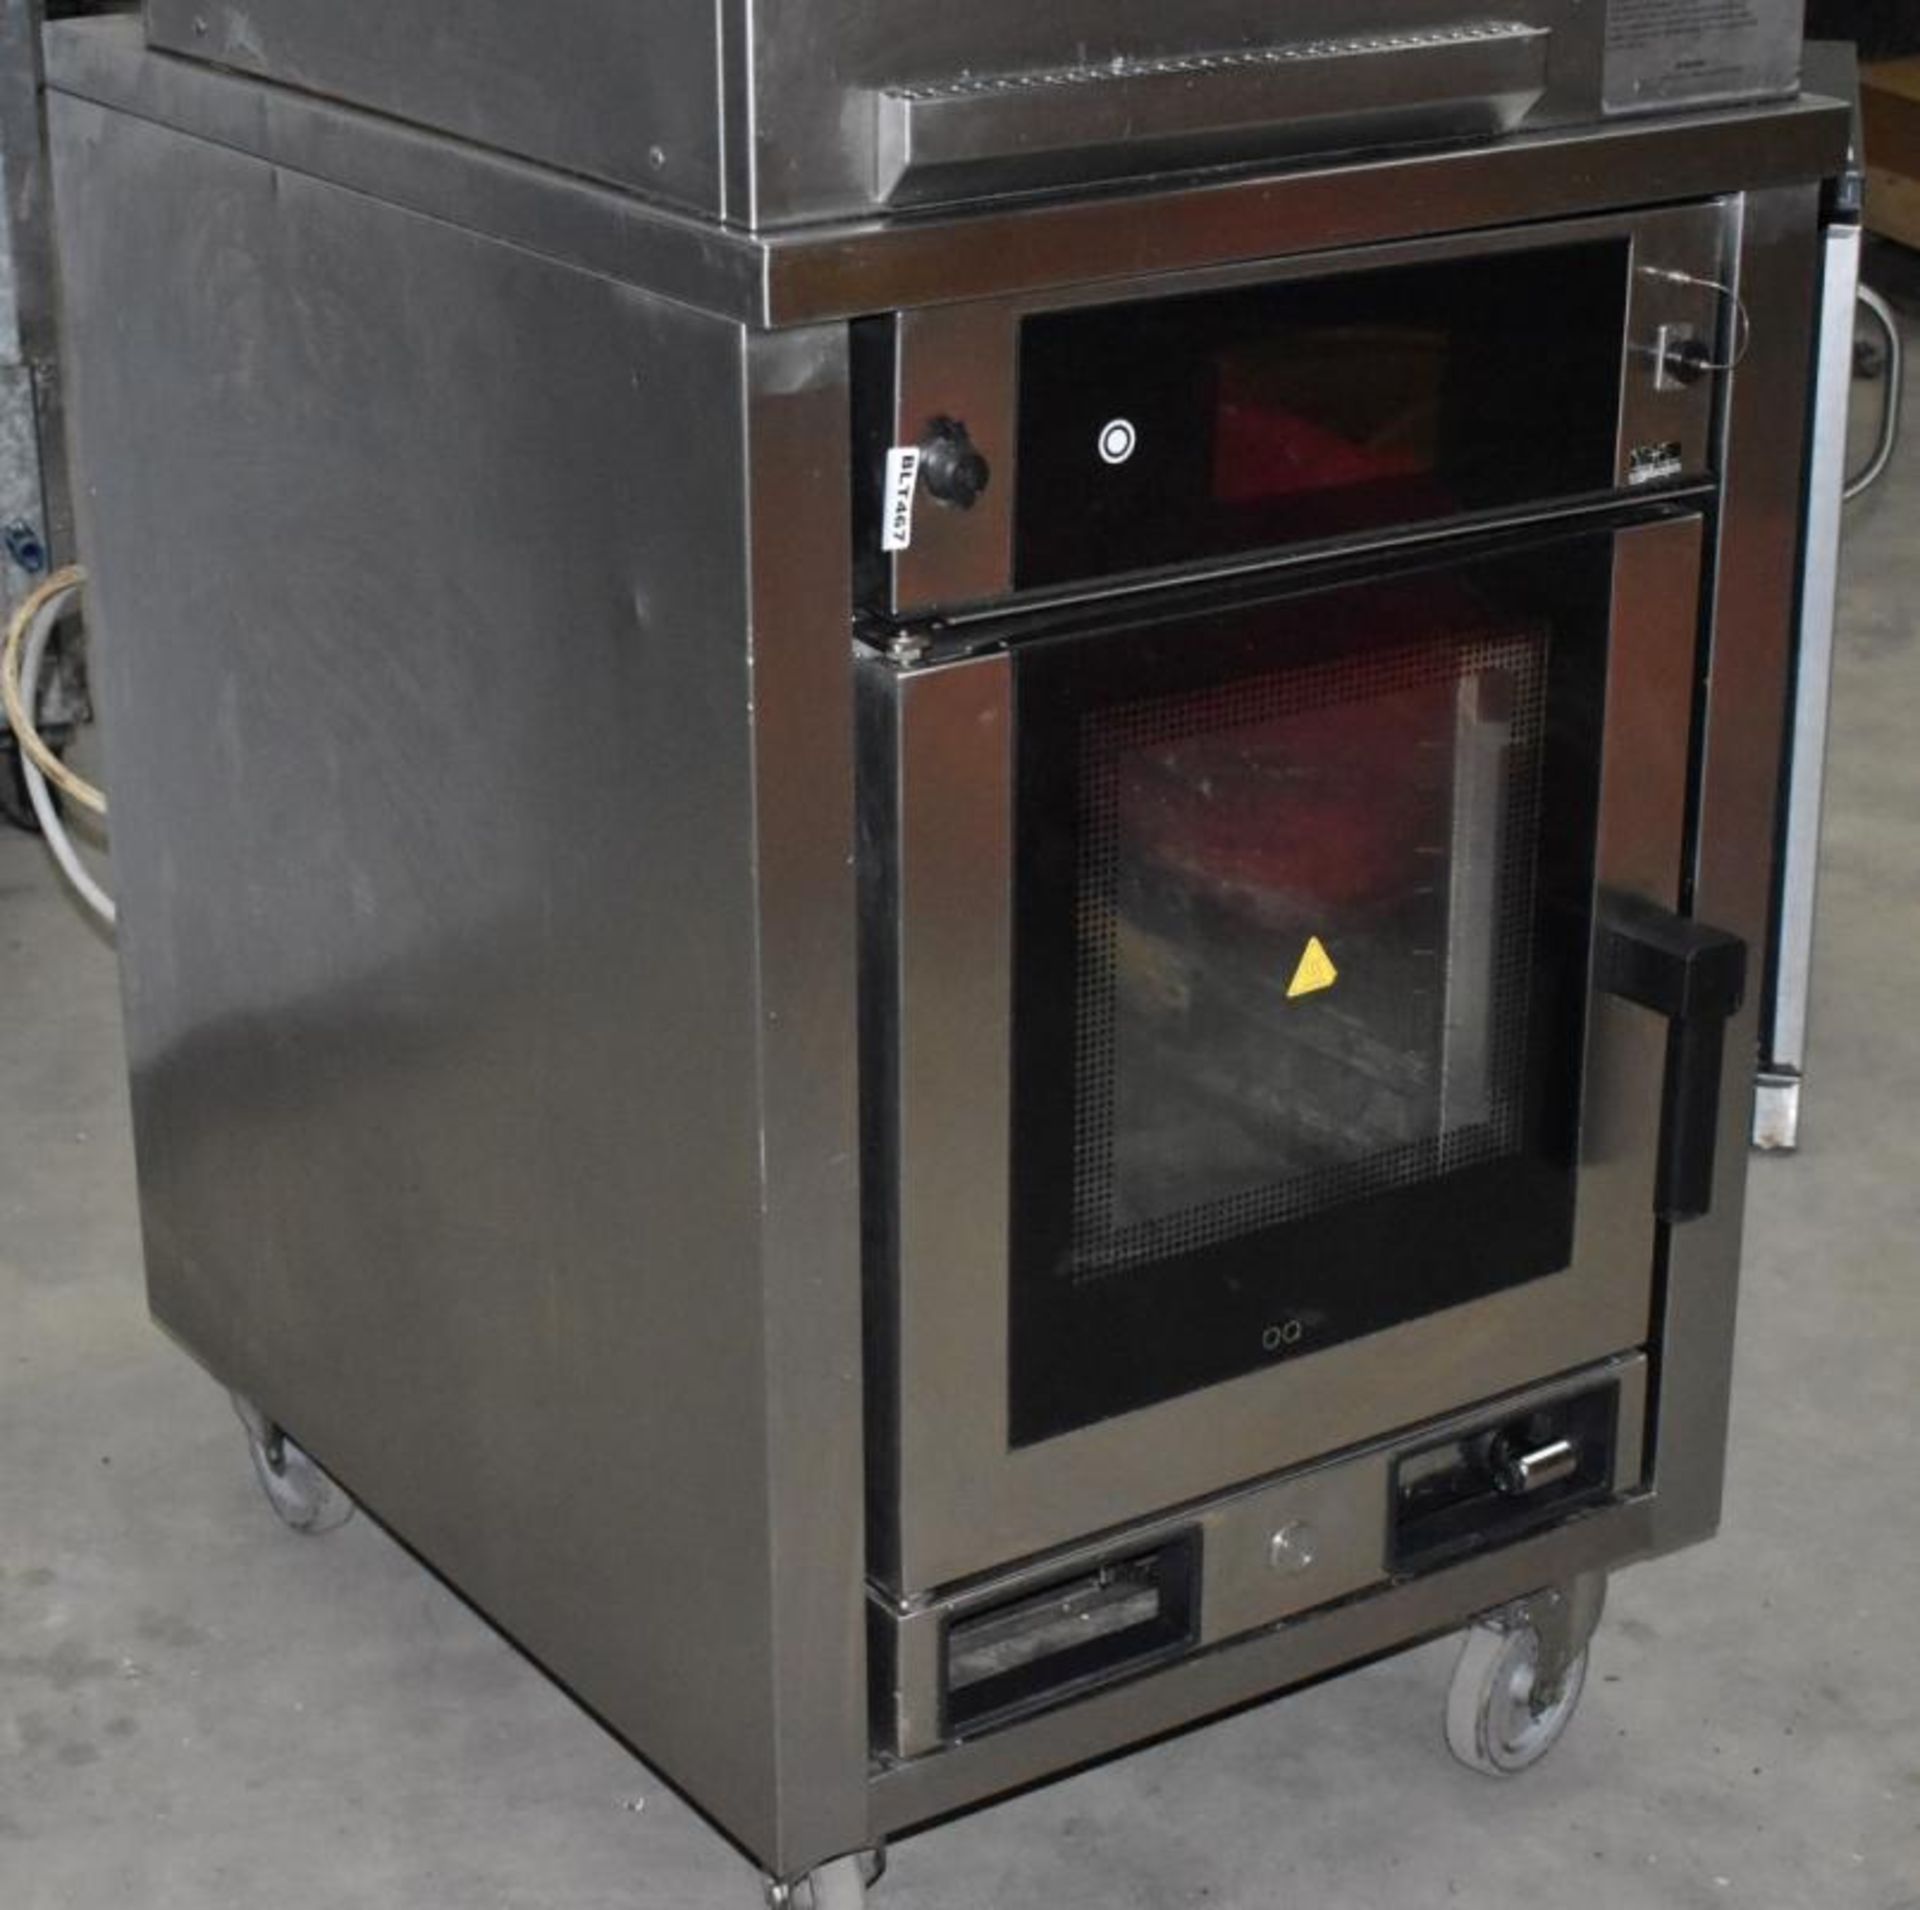 1 x Moduline Cook and Hold Convection Oven and Pressure Steamer Cooker - Features USB Connection, To - Image 3 of 16